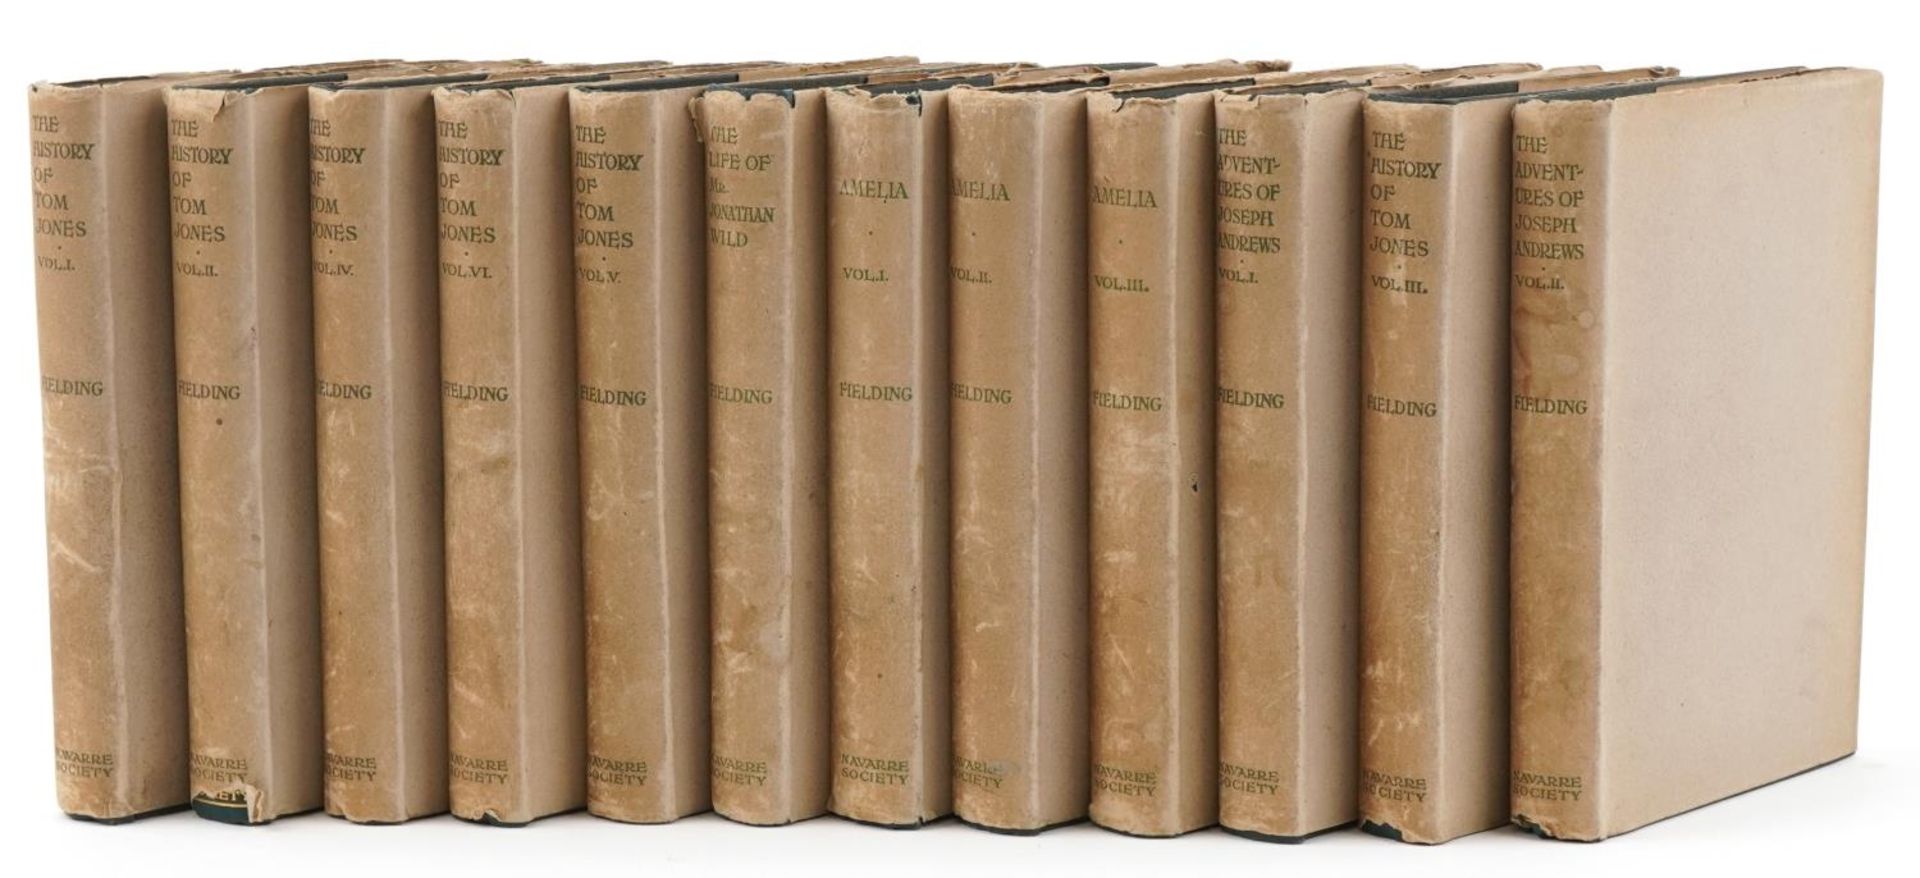 The Works of Henry Fielding, set of twelve Navarre Society hardback books with dust jackets - Image 2 of 10